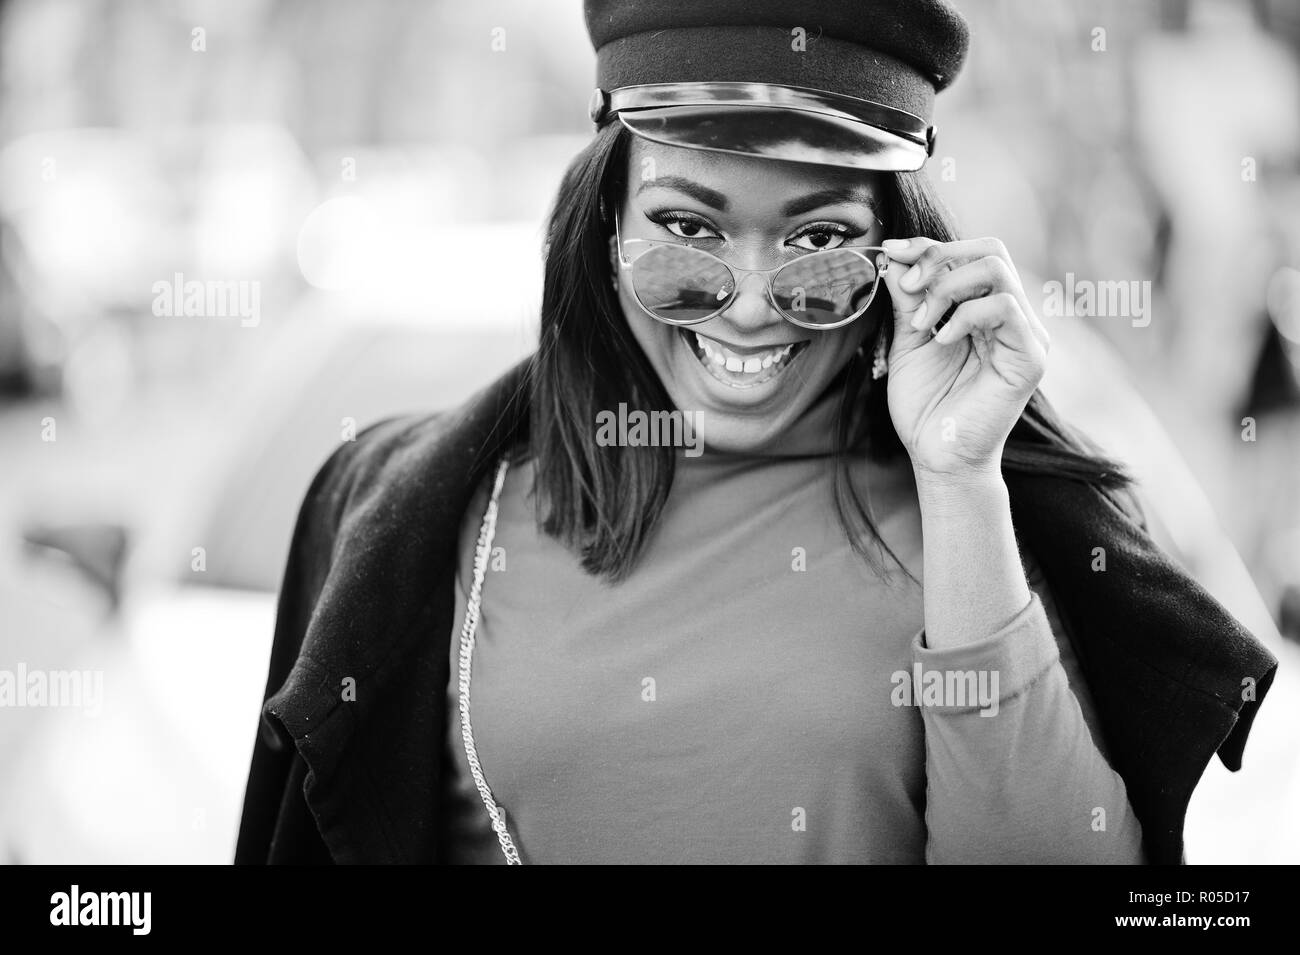 African american fashion girl in coat, newsboy cap and sunglasses posed at street against white business car. Stock Photo